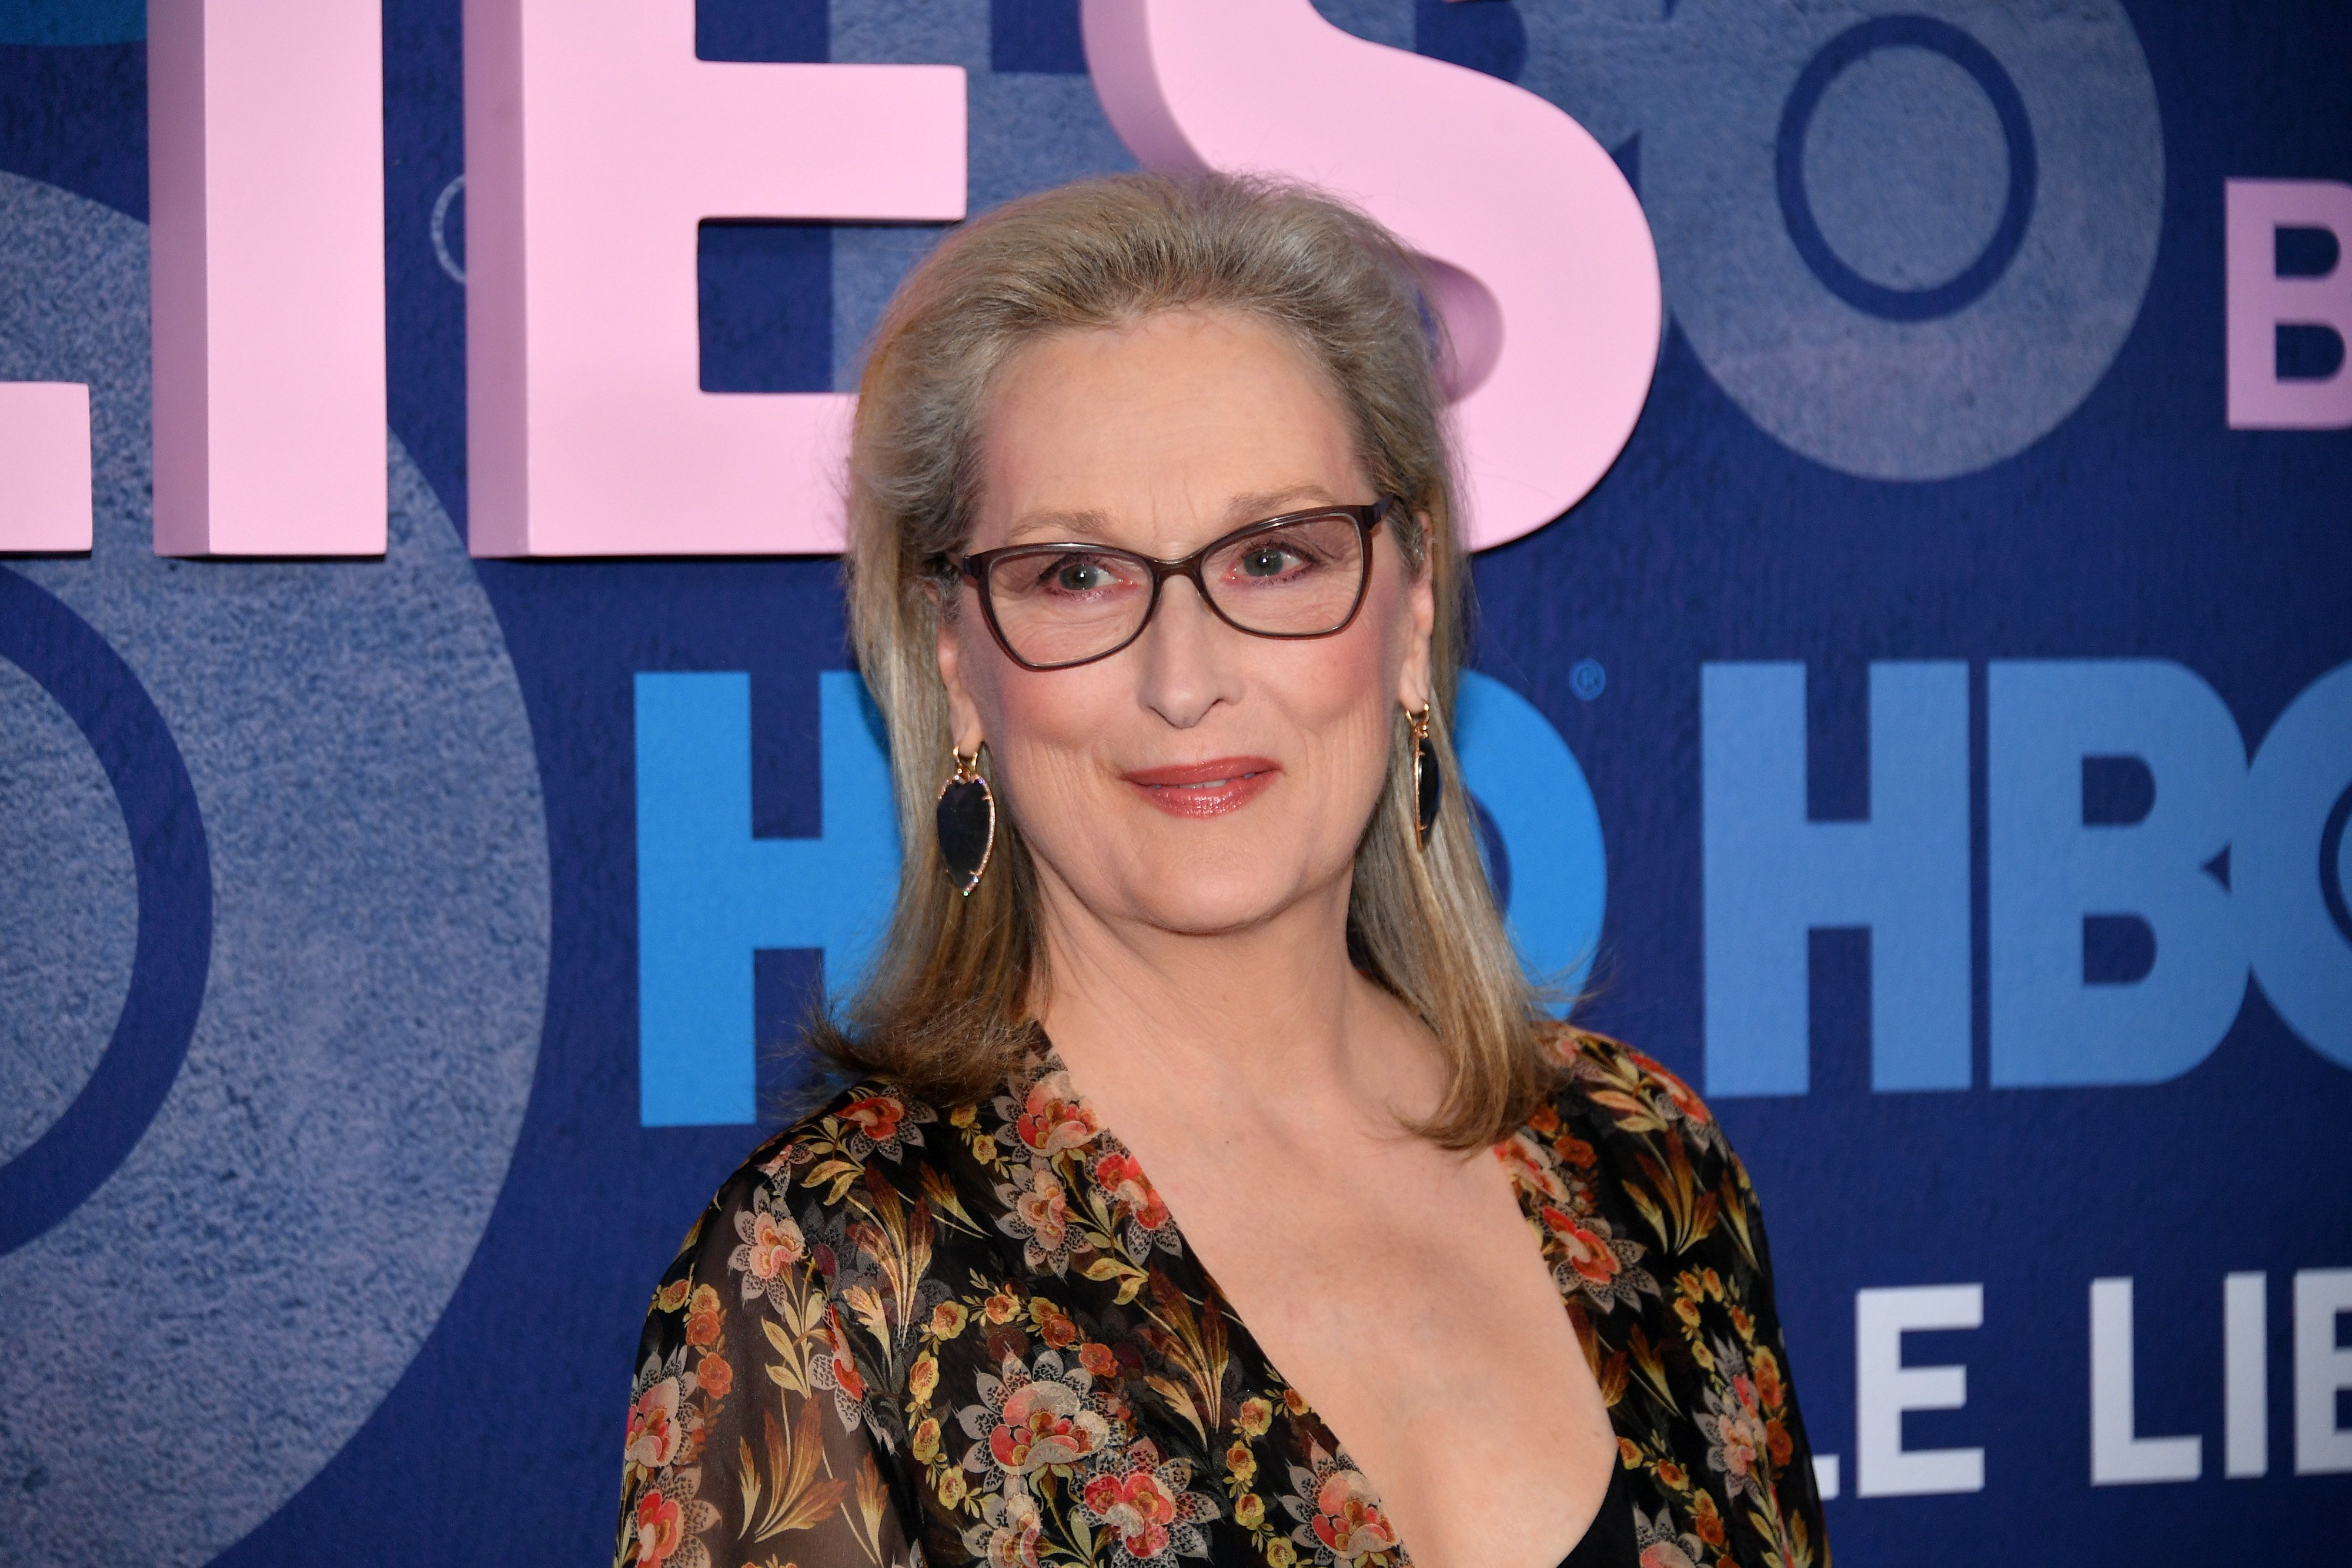 Meryl Streep attends the premiere of "Big Little Lies" season 2 in New York City on May 29, 2019 | Photo: Getty Images